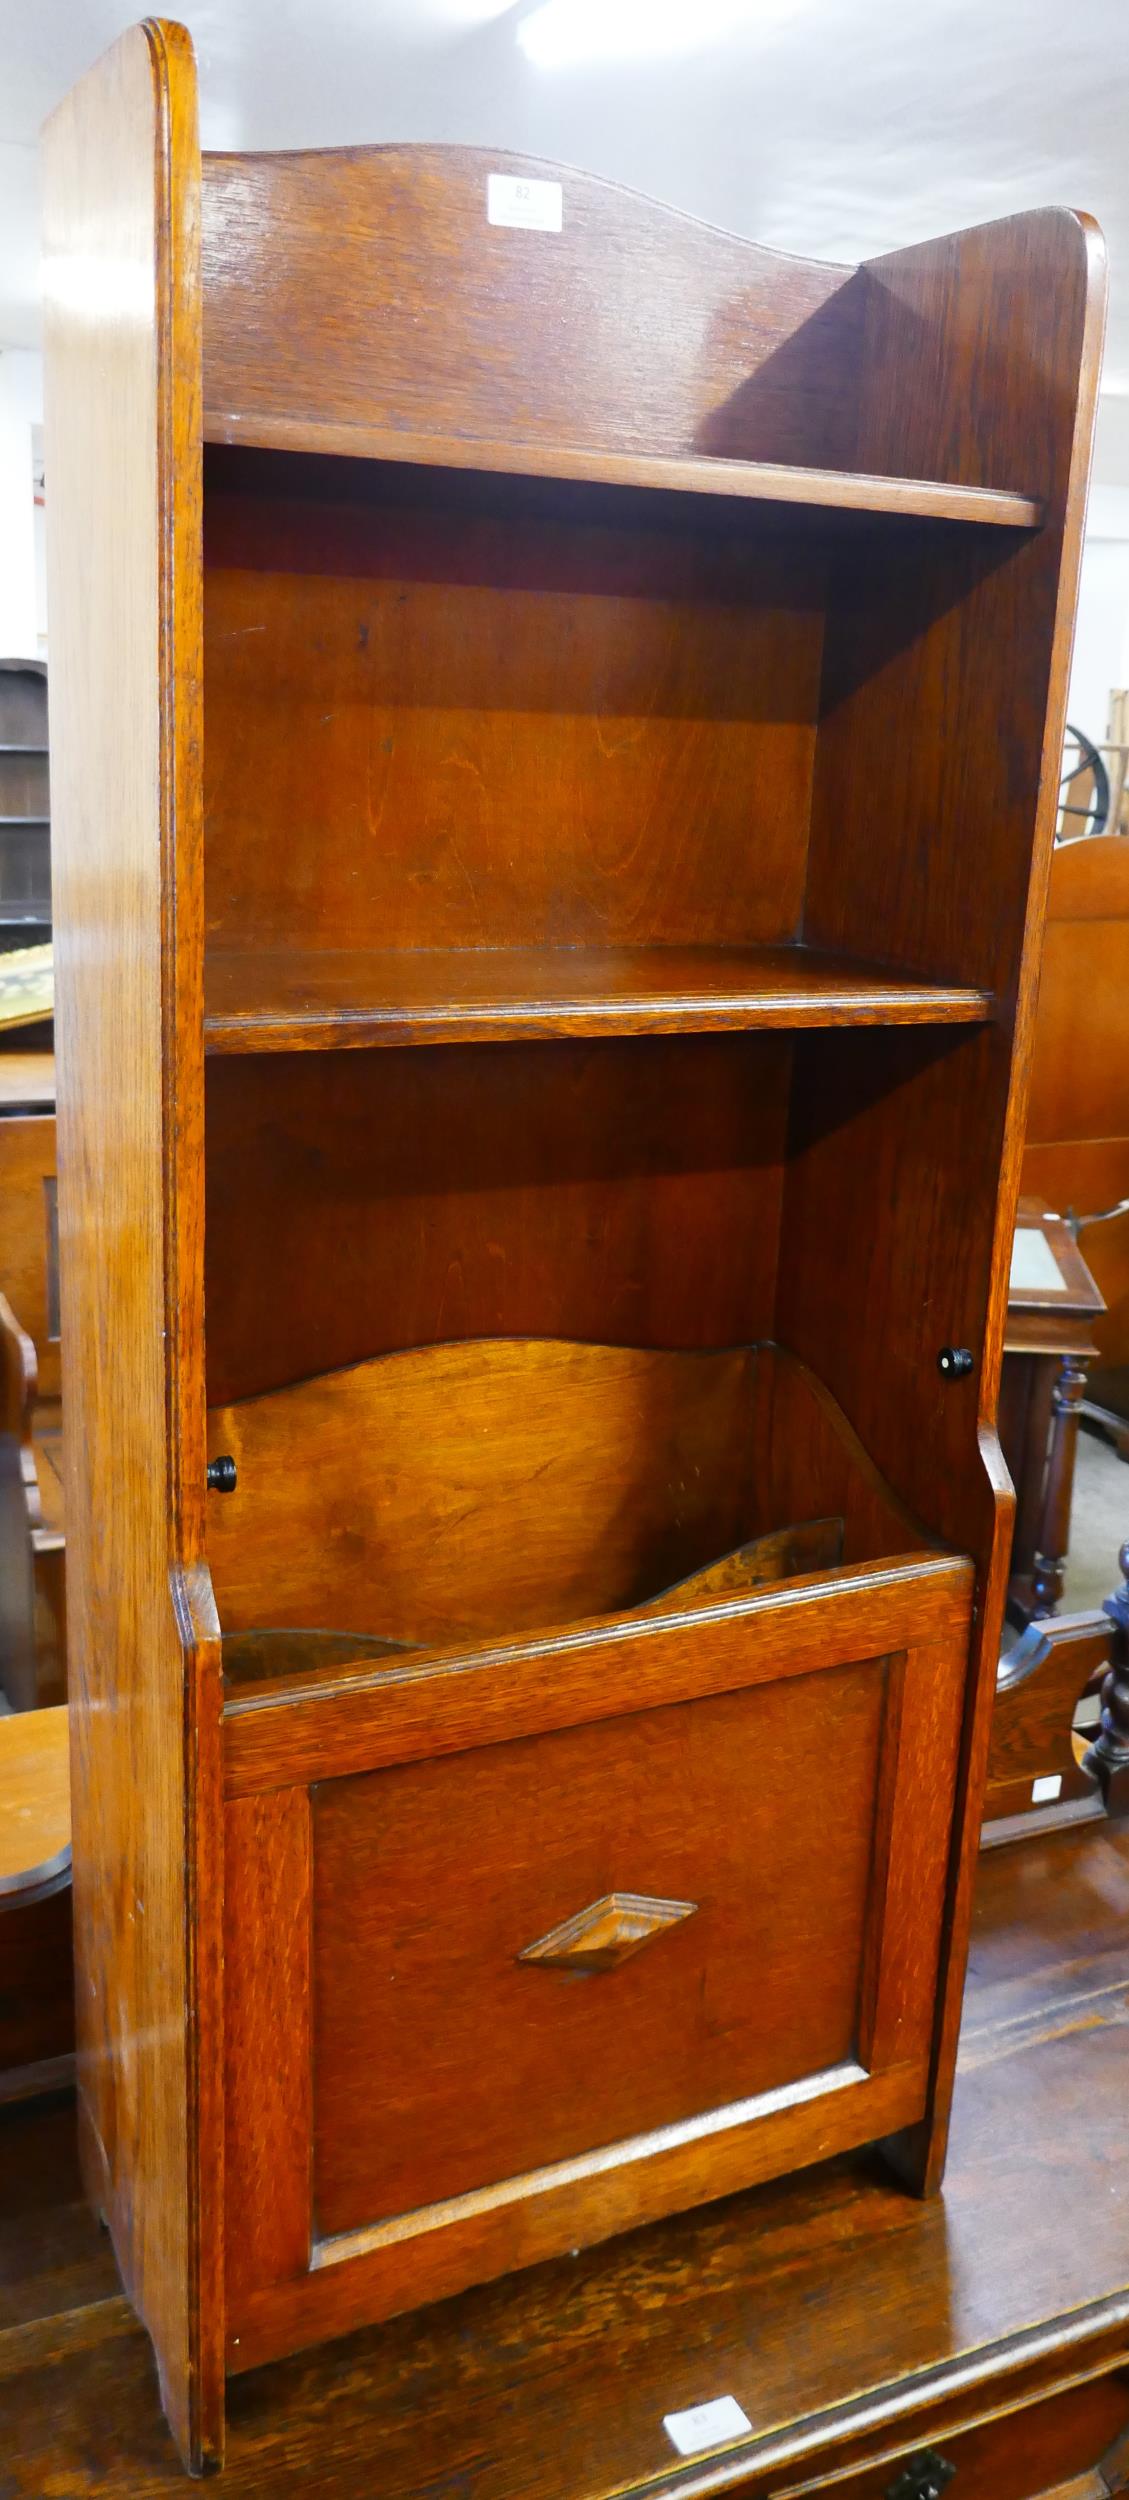 An early 20th Century oak newspaper stand